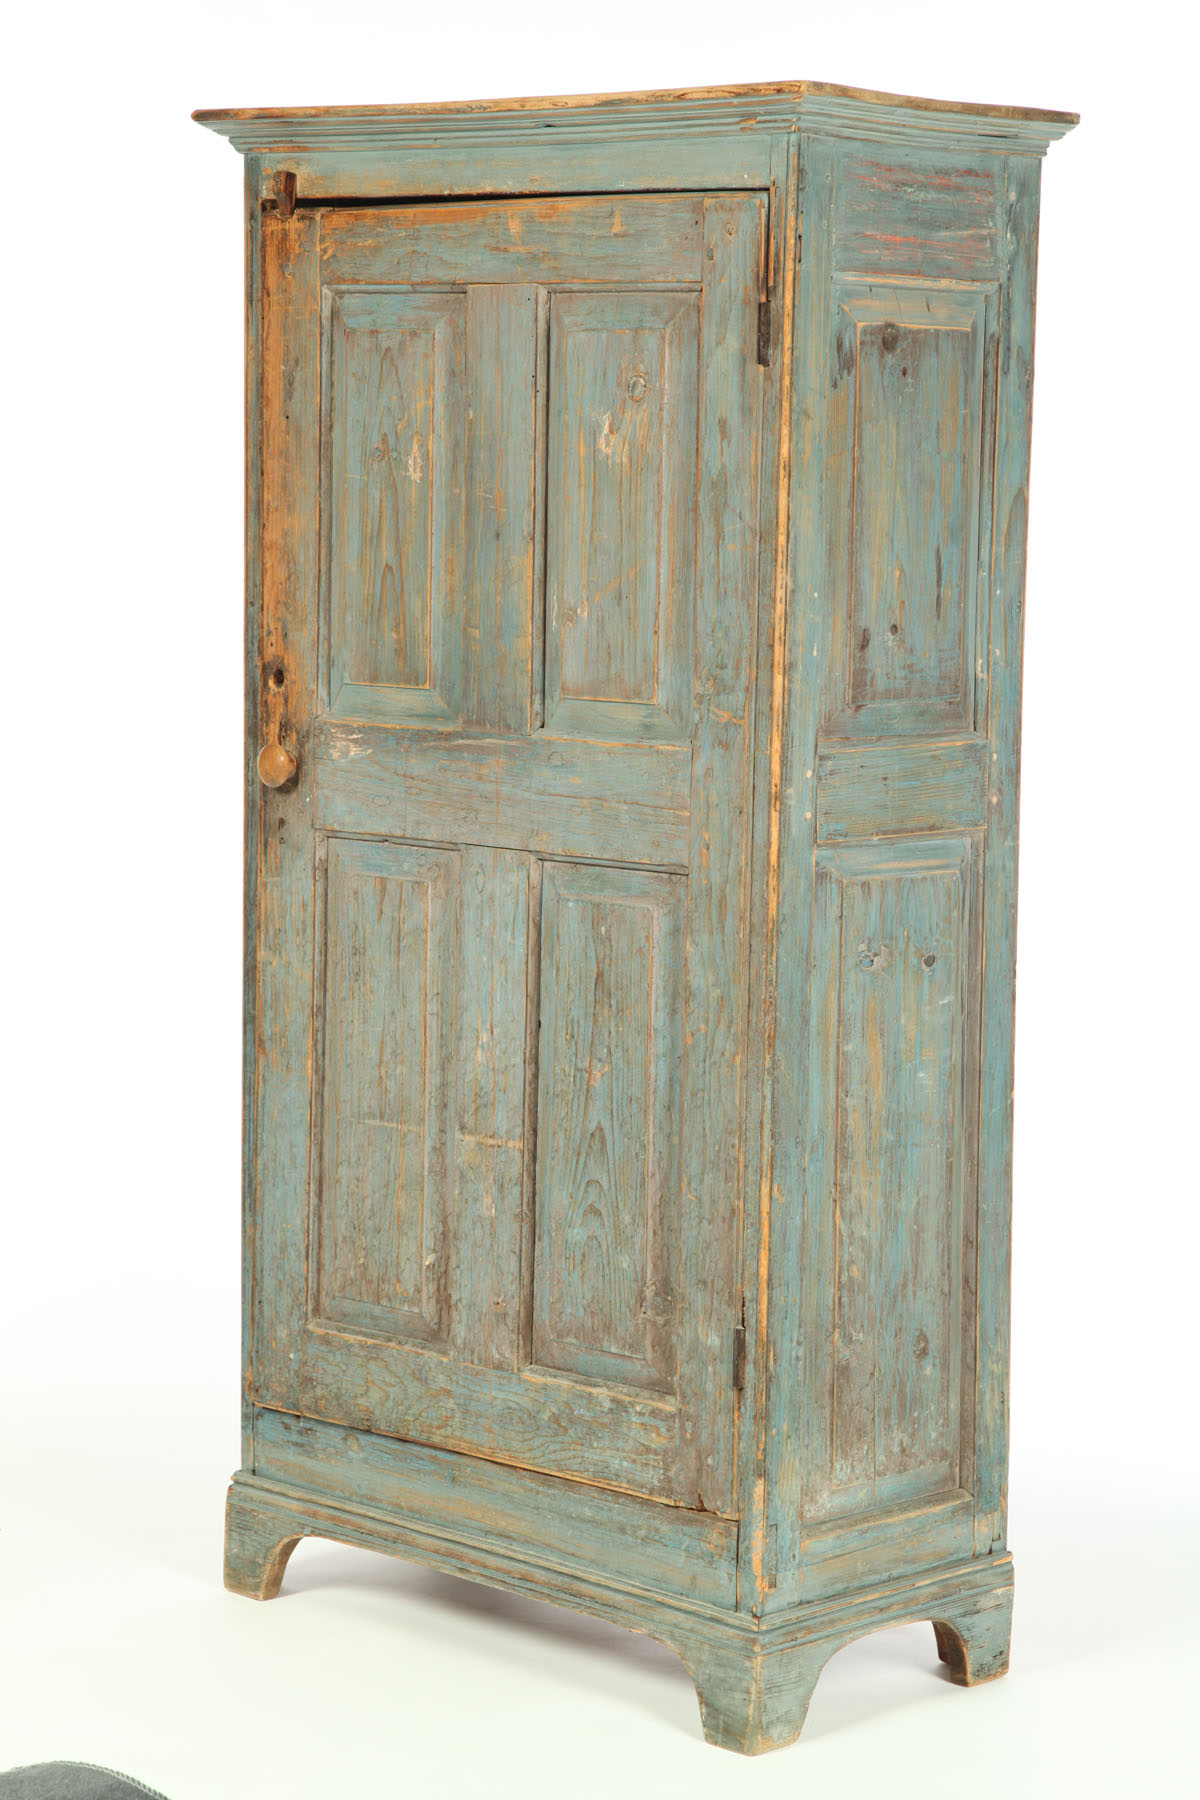  JELLY OR PANTRY CUPBOARD American 123980